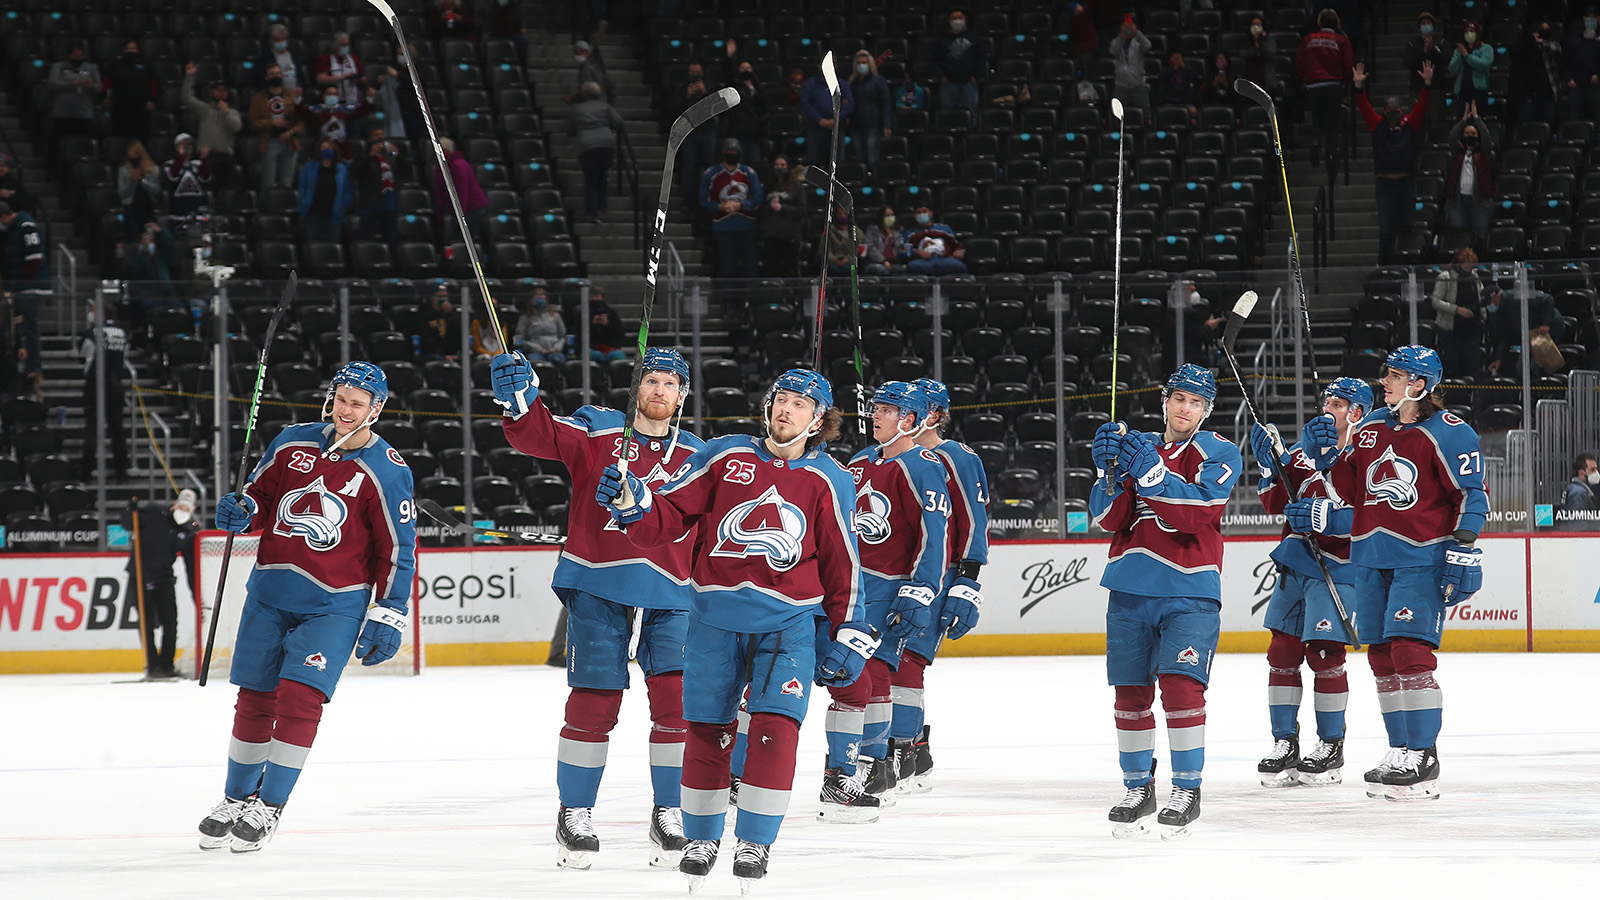 Members of the Colorado Avalanche salute the fans after the 9-3 victory against the Arizona Coyotes on March 31, 2021 in Denver.